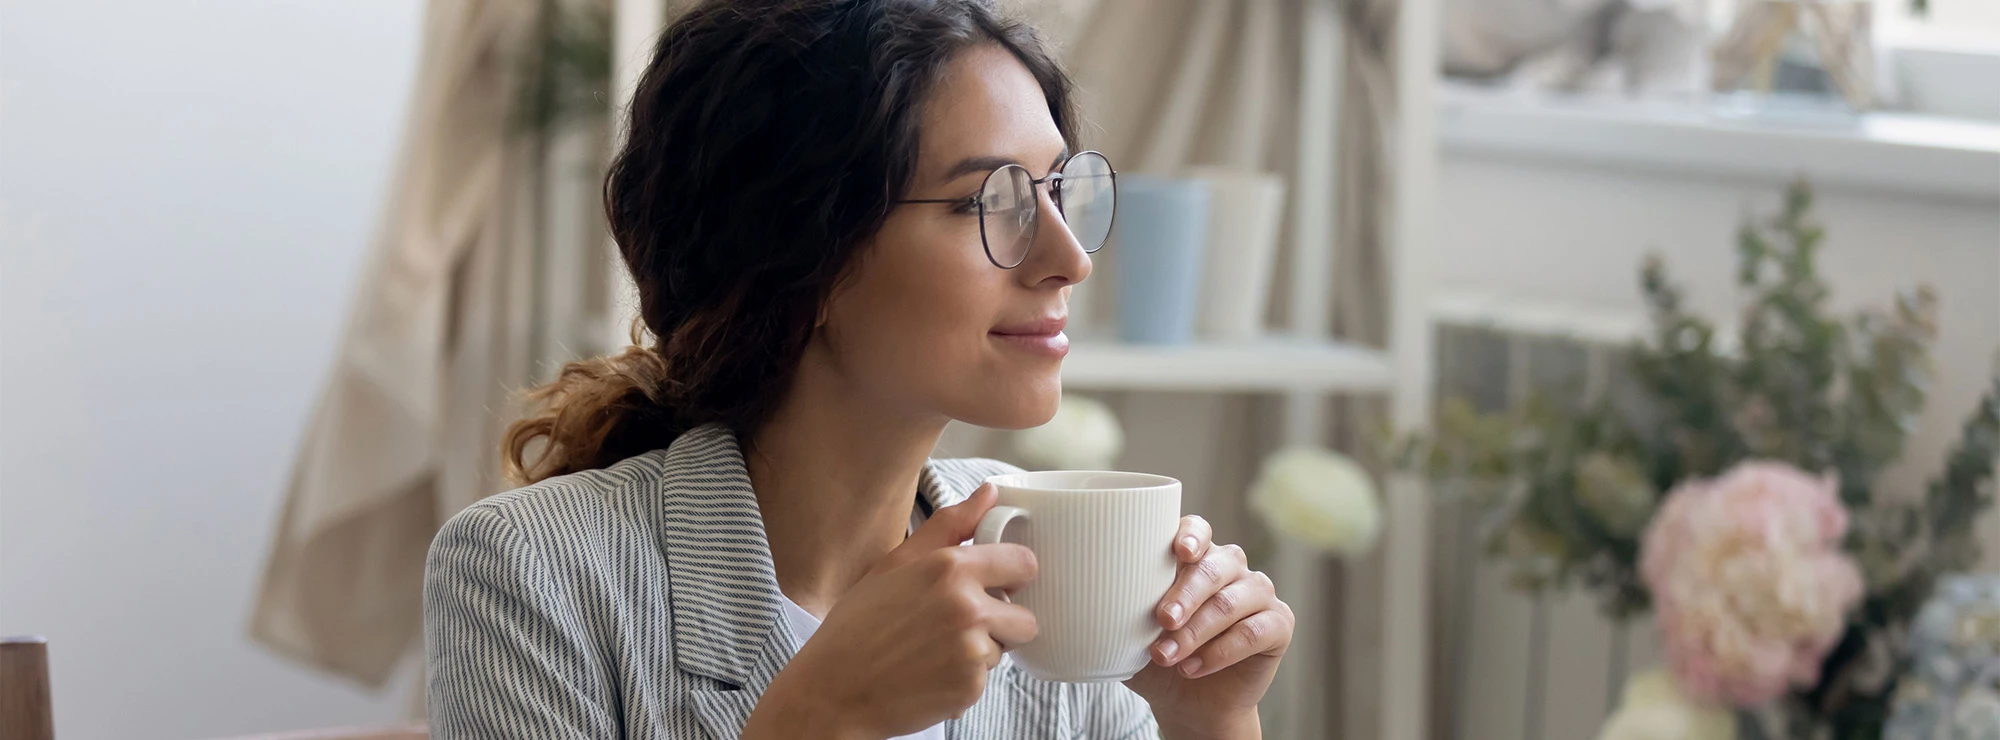 Smiling young business woman with glasses drinks coffee at home in her office